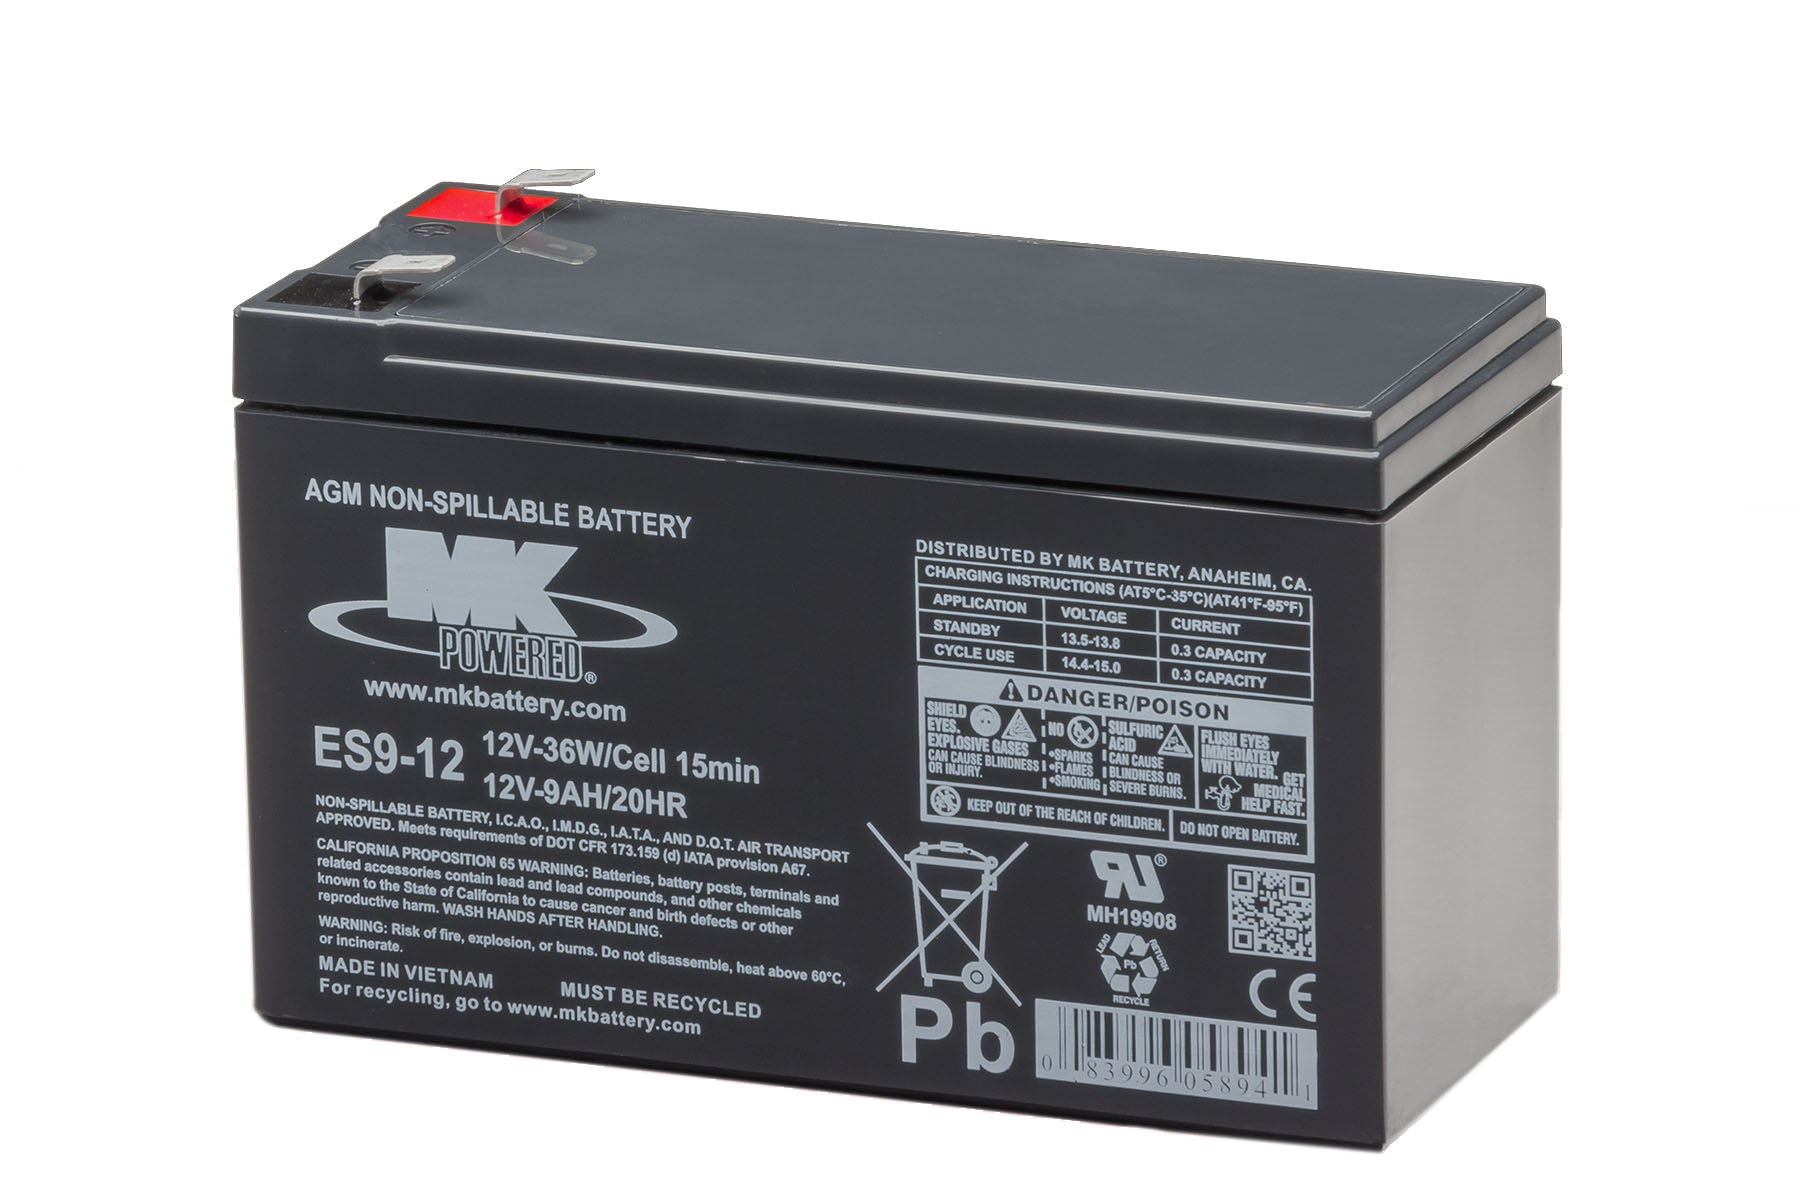 WP9-12 BATTERIE AGM 12V 9A SCELLEE-T2